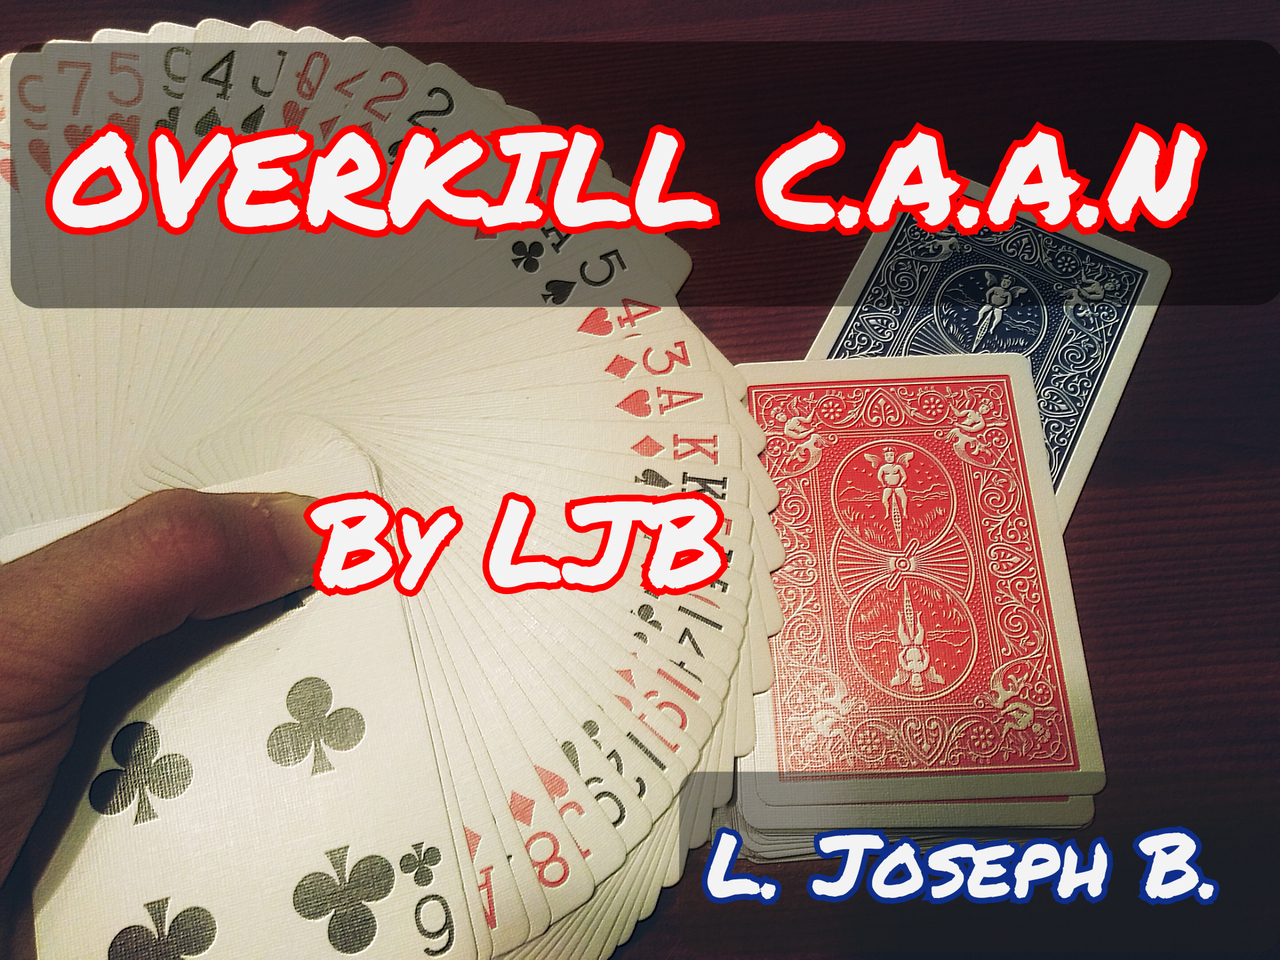 Overkill C.A.A.N By Joseph B (MP4 Video Download)